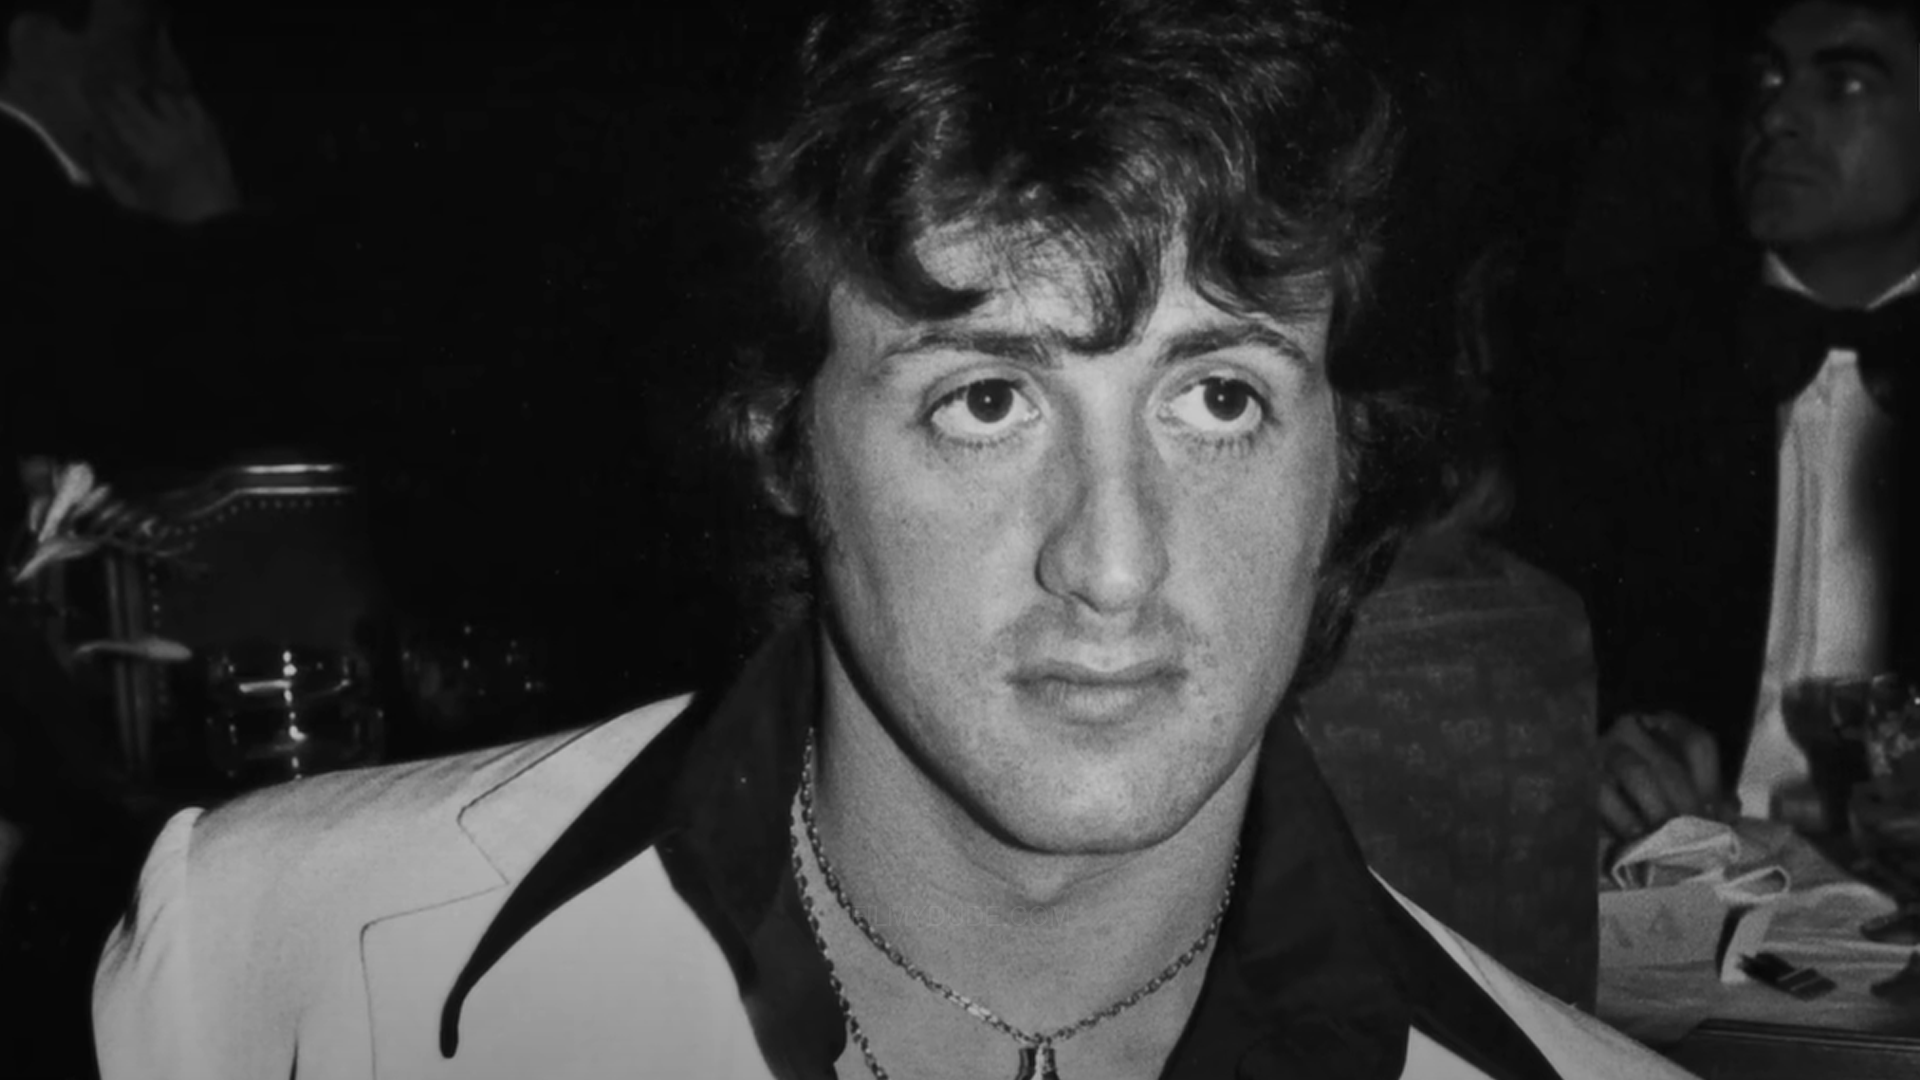 Sylvester Stallone candidly